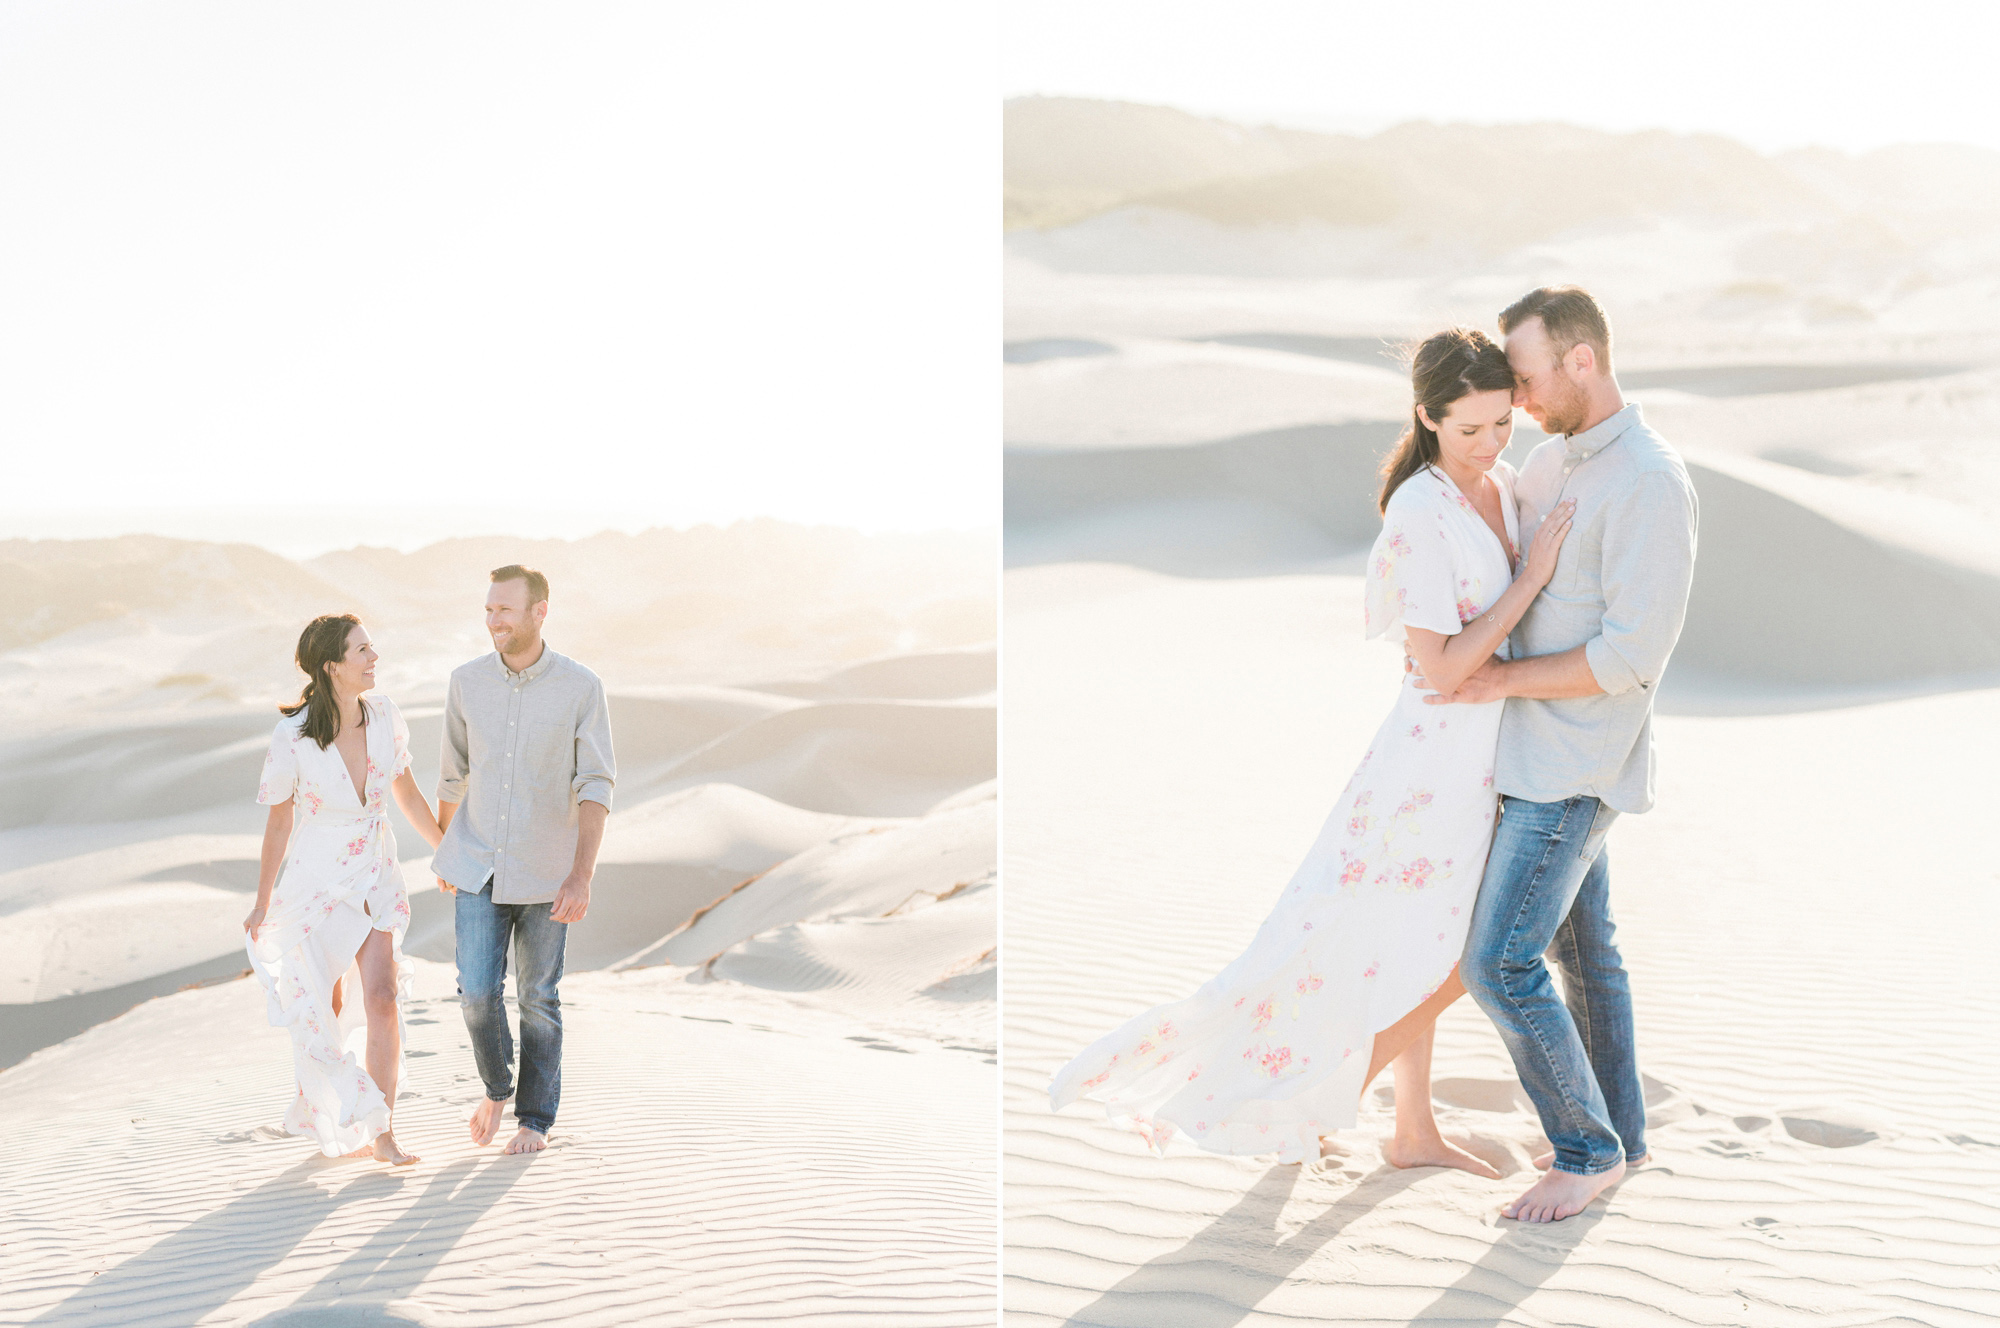 Anniversary session at the sand dunes near Pismo Beach.